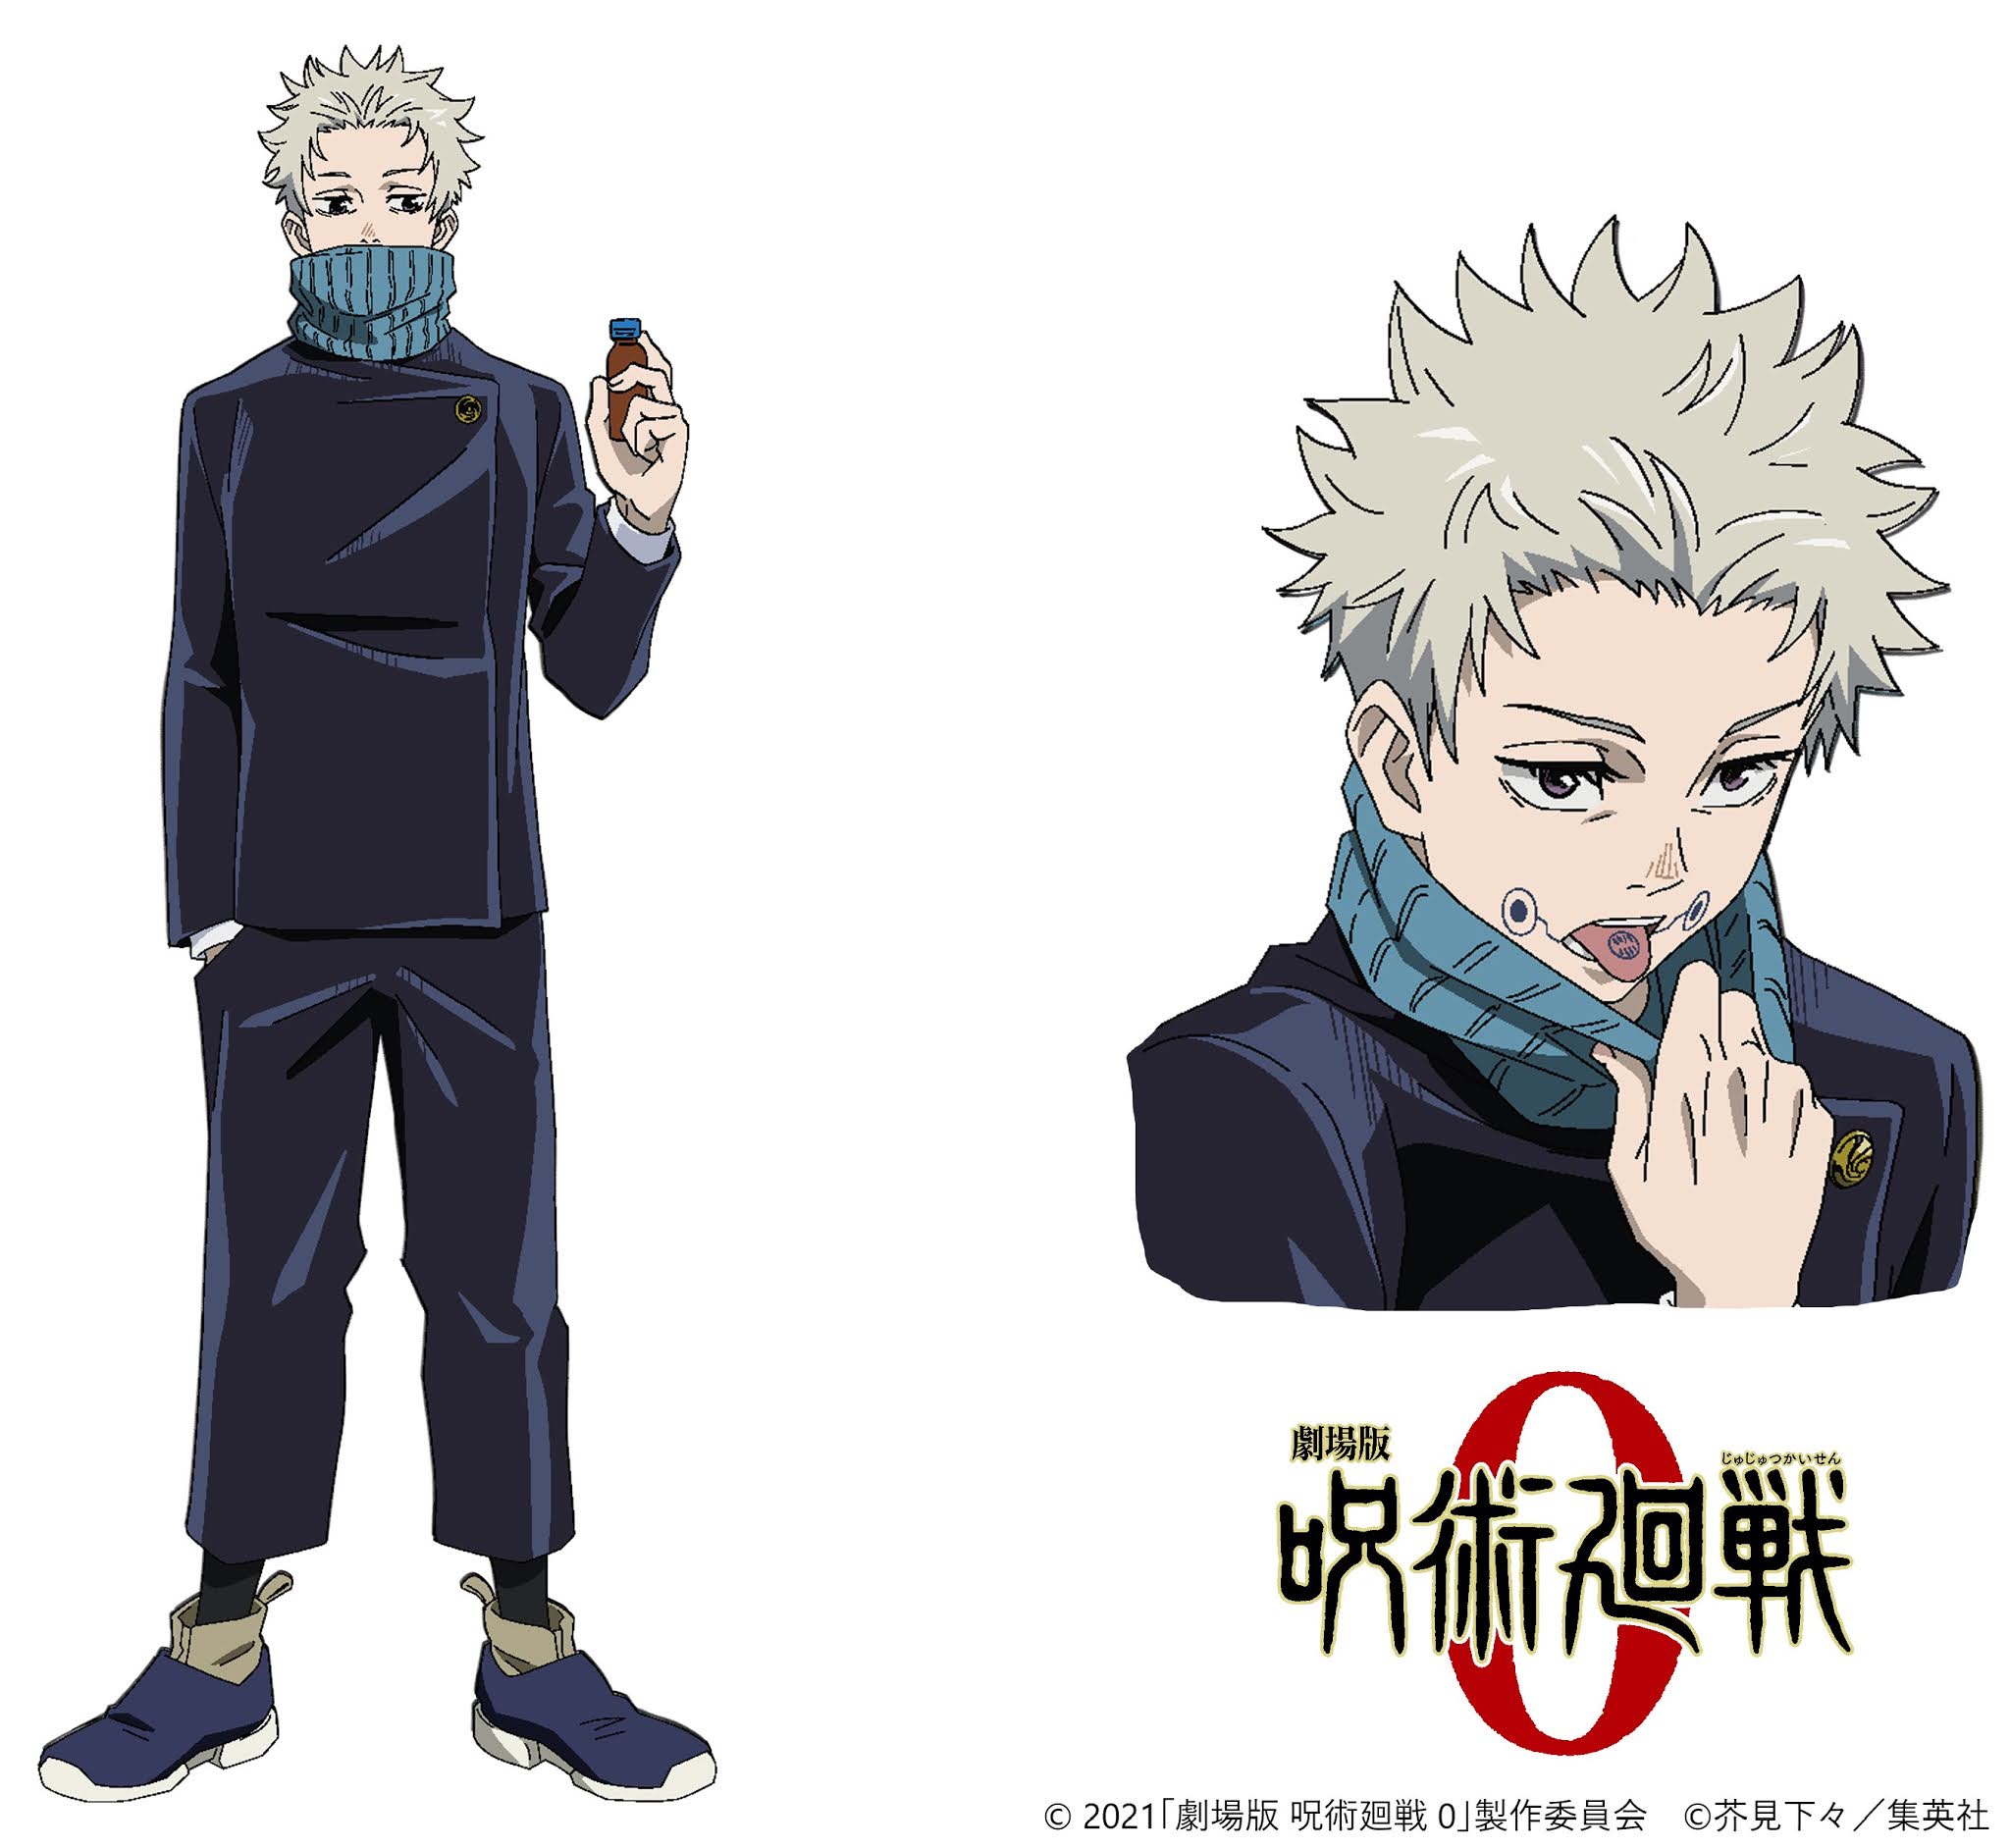 Jujutsu Kaisen 0 Anime Movie Reveals New Visual And Release Date Sgcafe ...